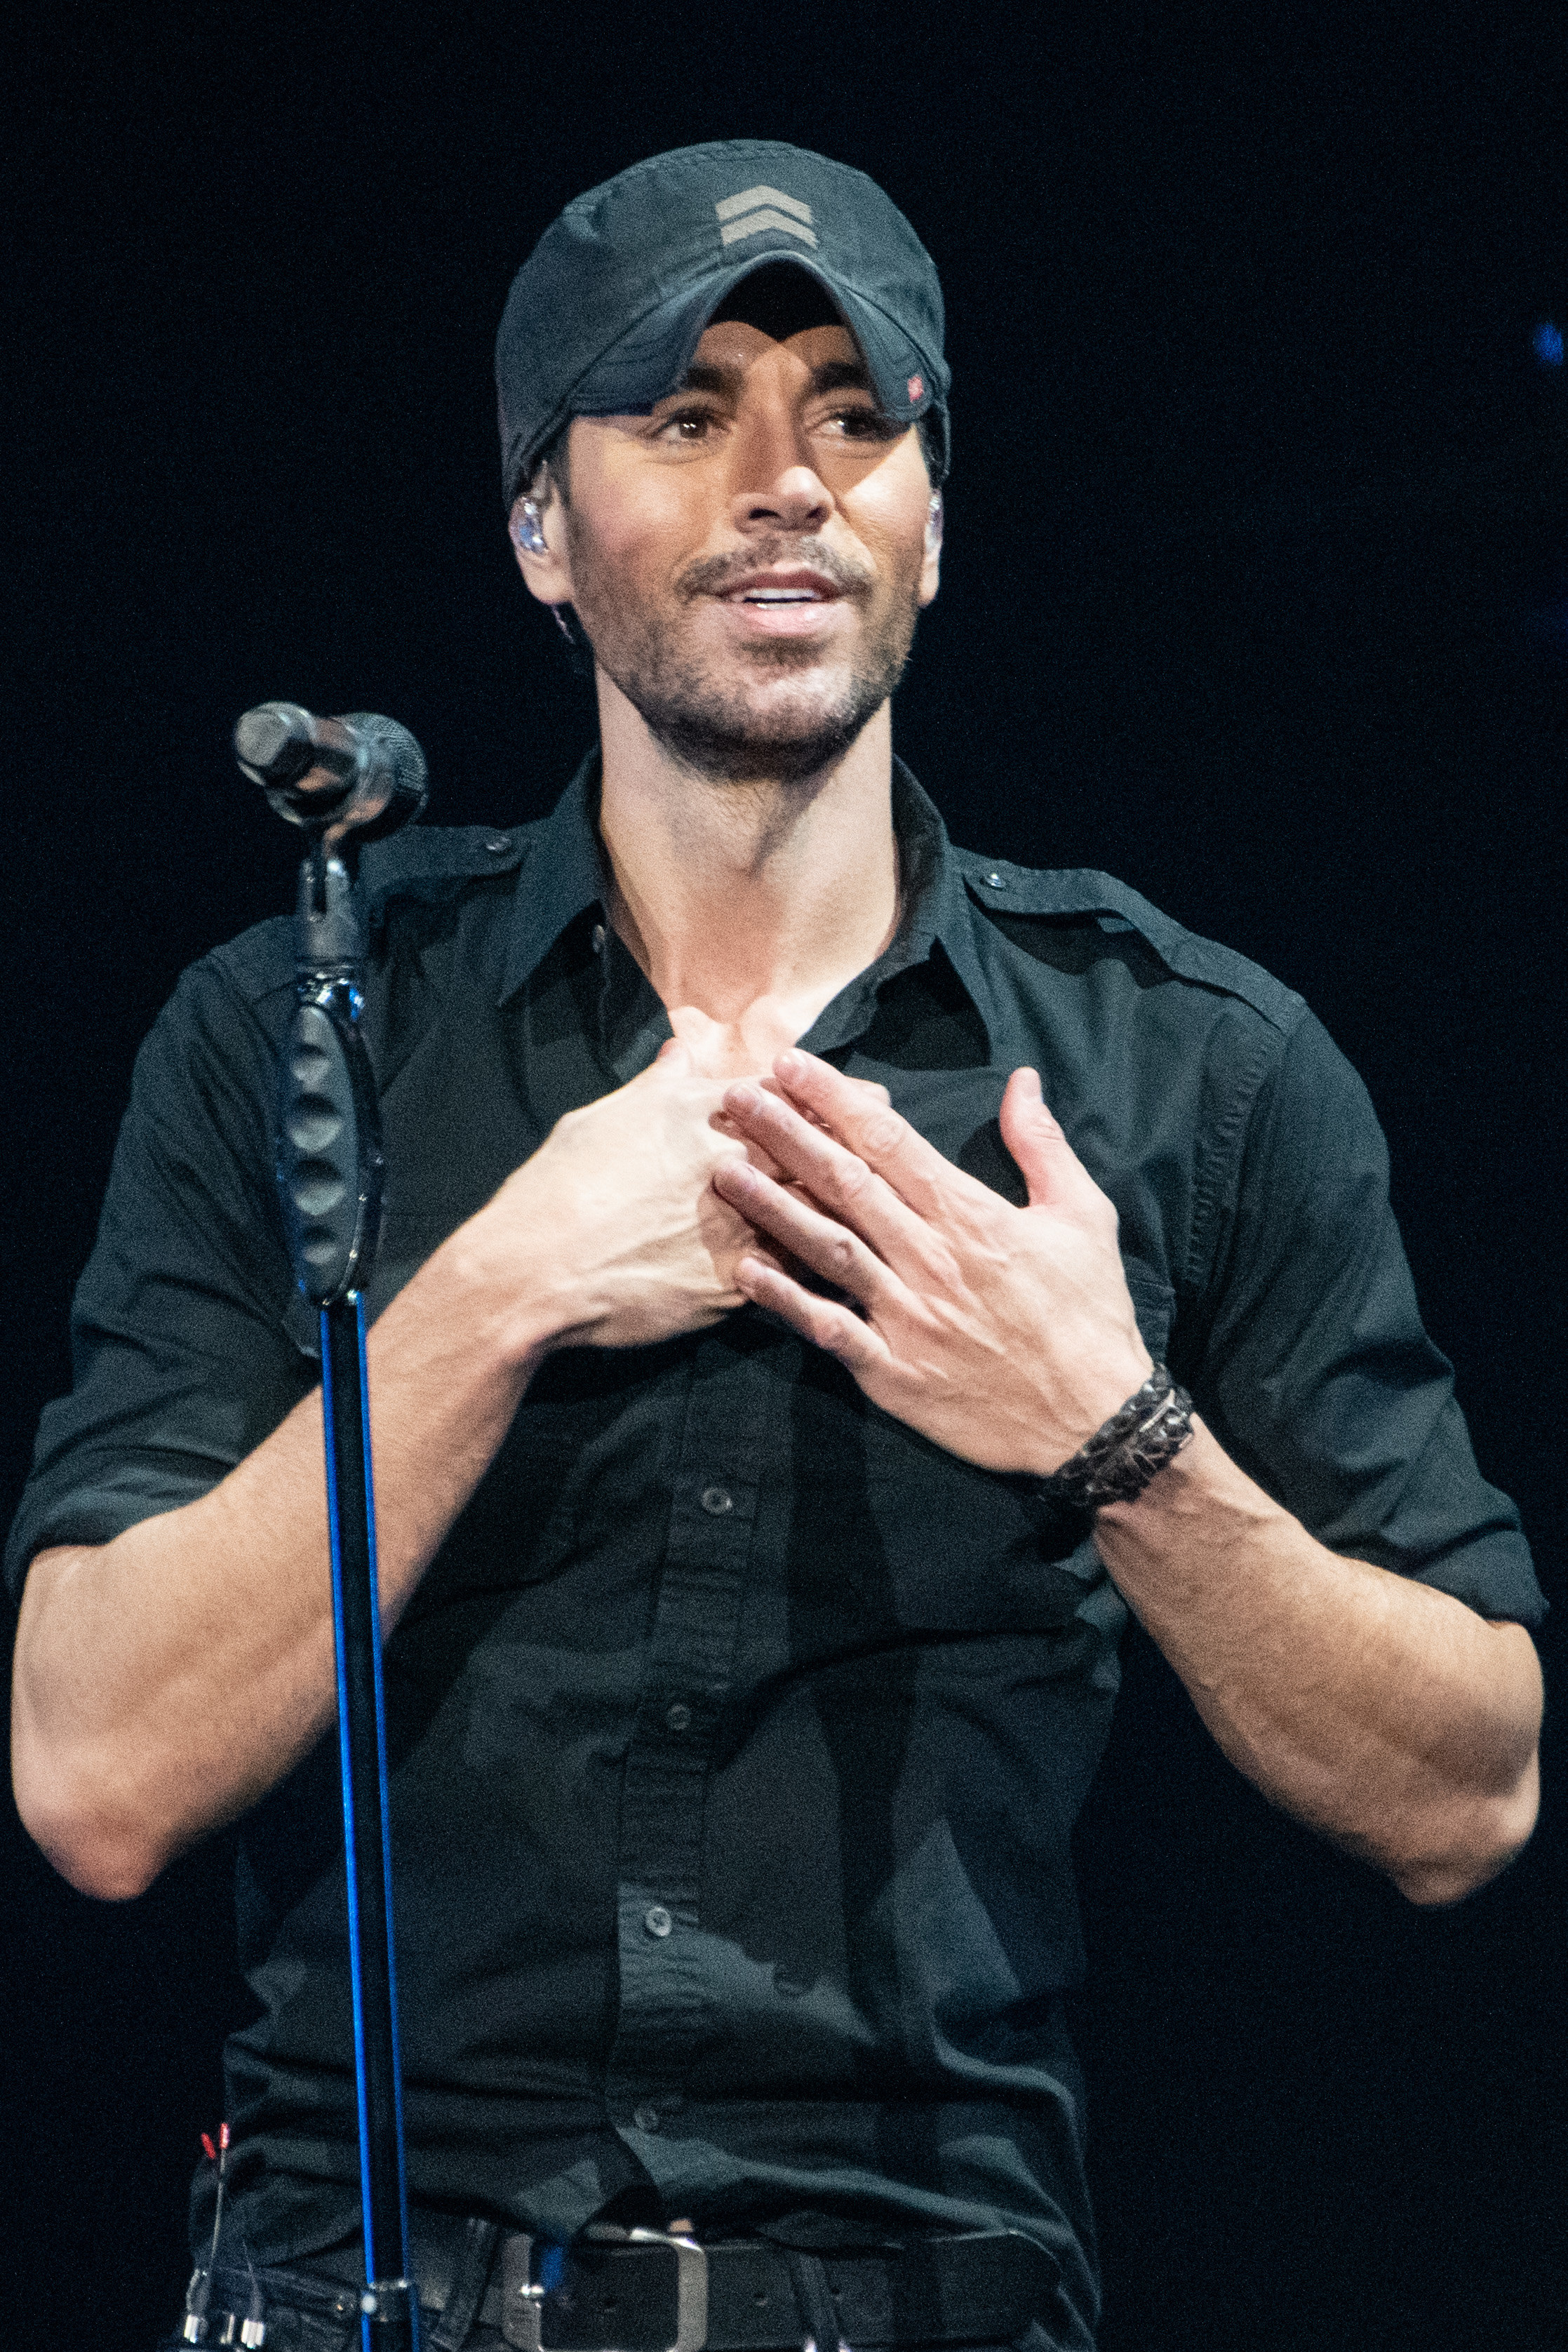 Enrique Iglesias in front of a mic